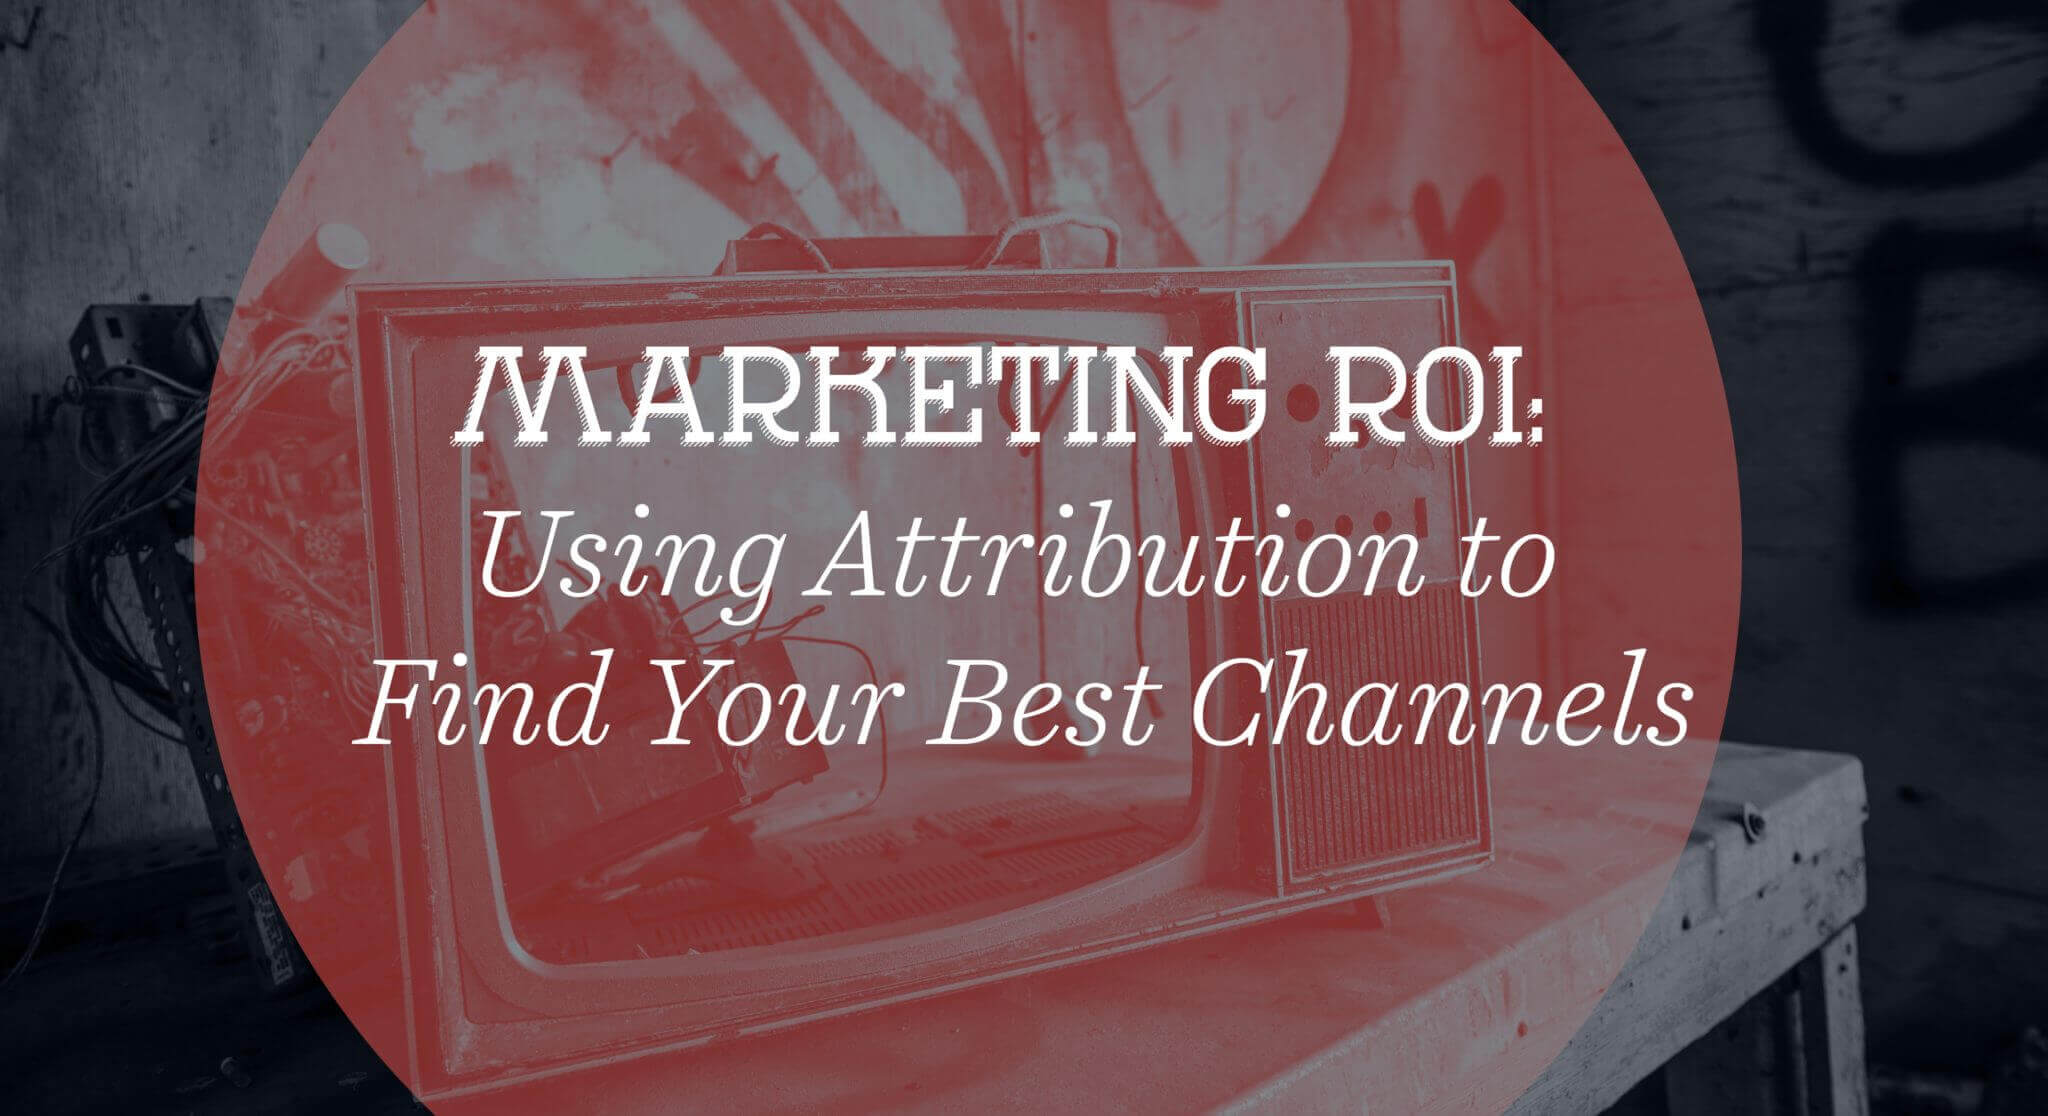 Marketing ROI- Using Attribution to Find Your Best Channels